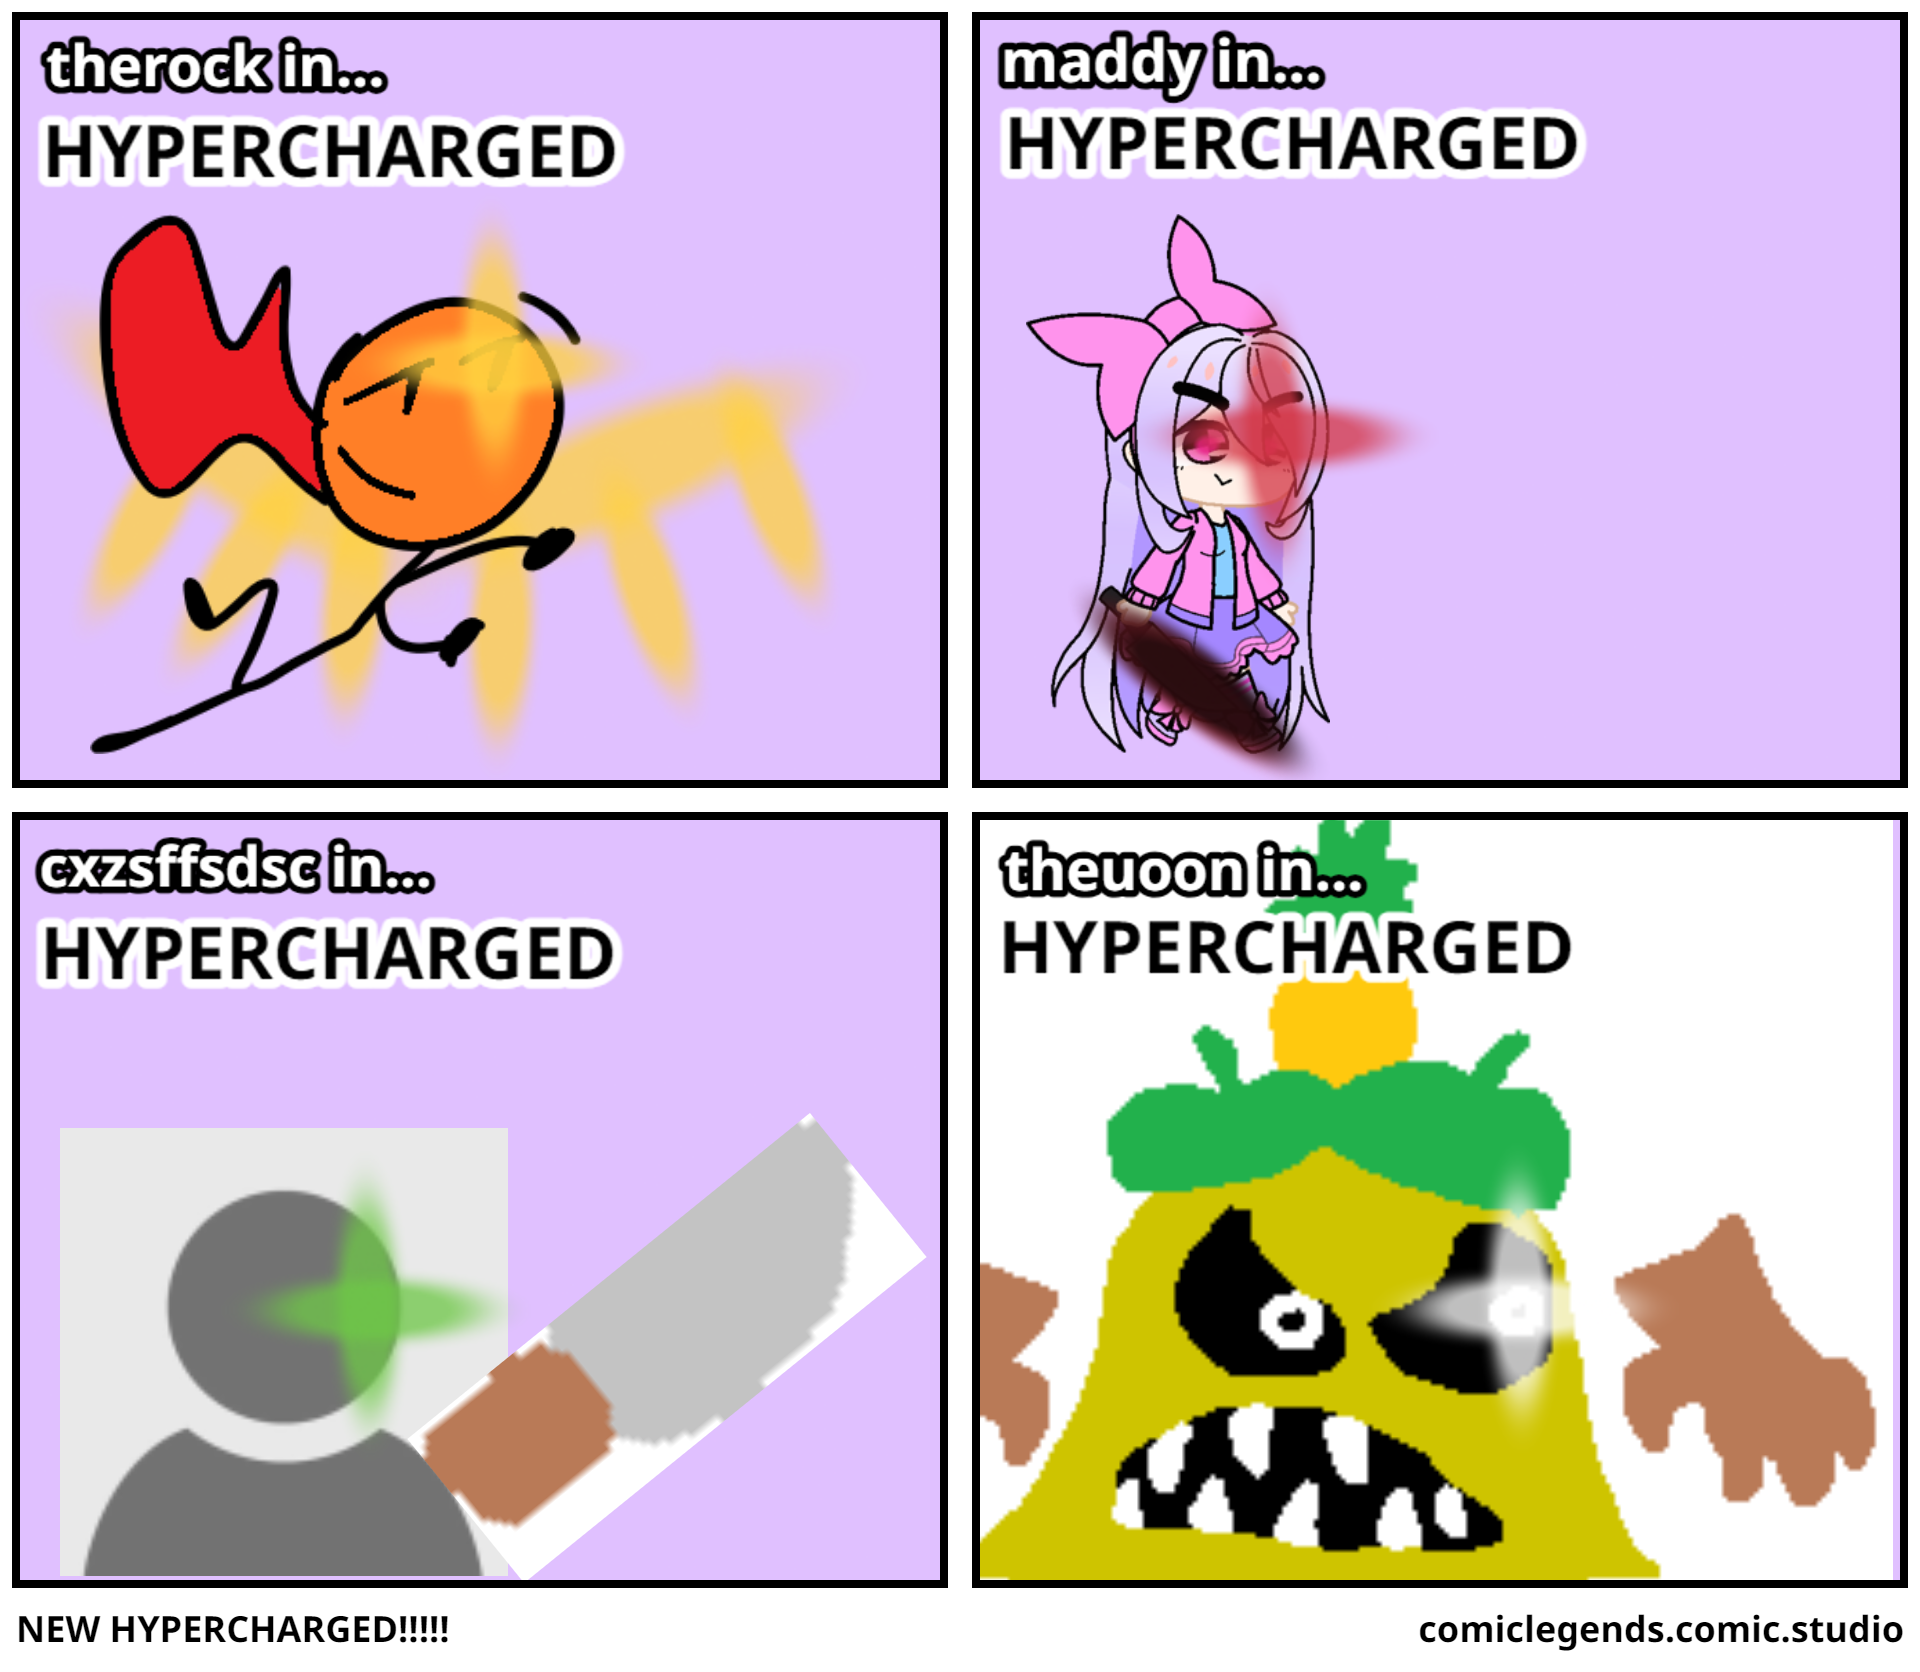 NEW HYPERCHARGED!!!!!